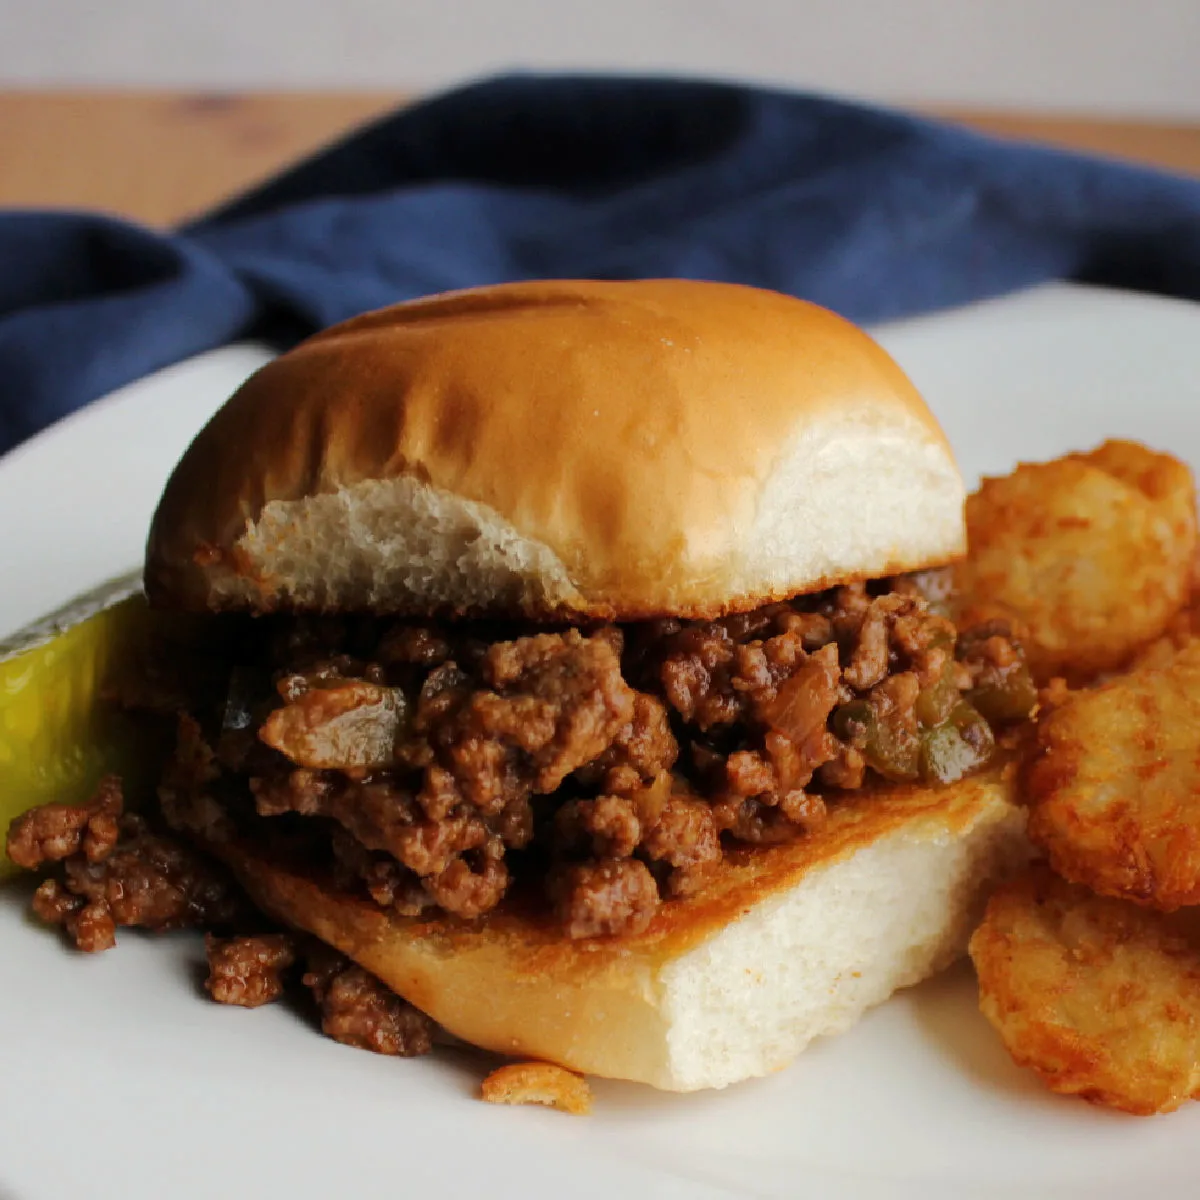 toasted bun filled with crumbly sloppy joe mixture with tater tots and a pickle on the side.